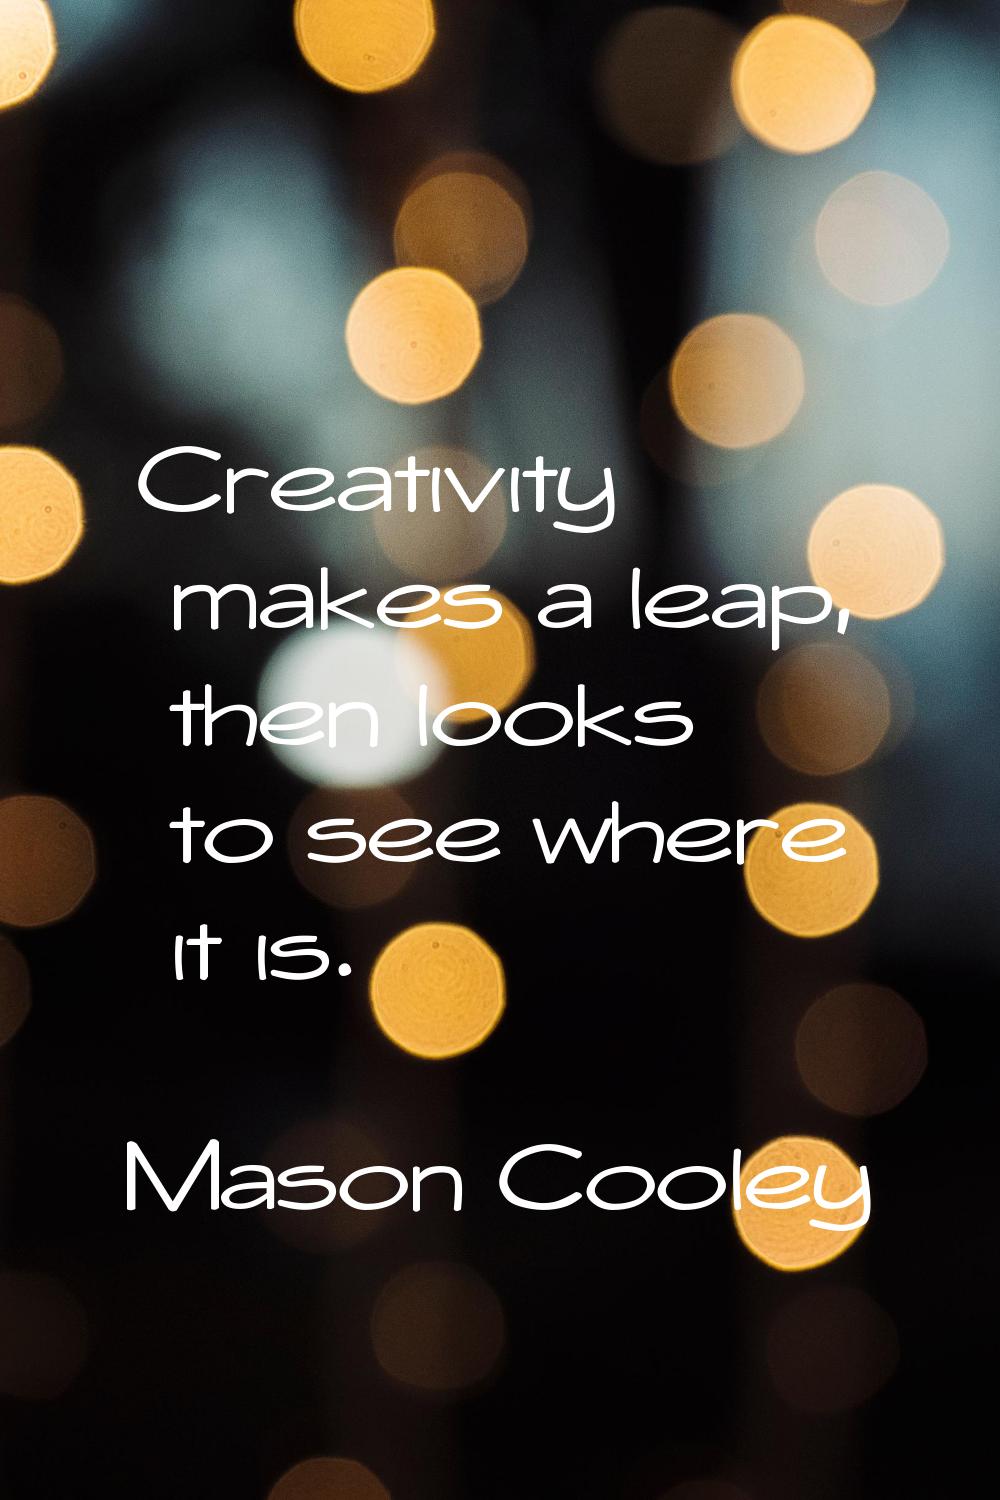 Creativity makes a leap, then looks to see where it is.